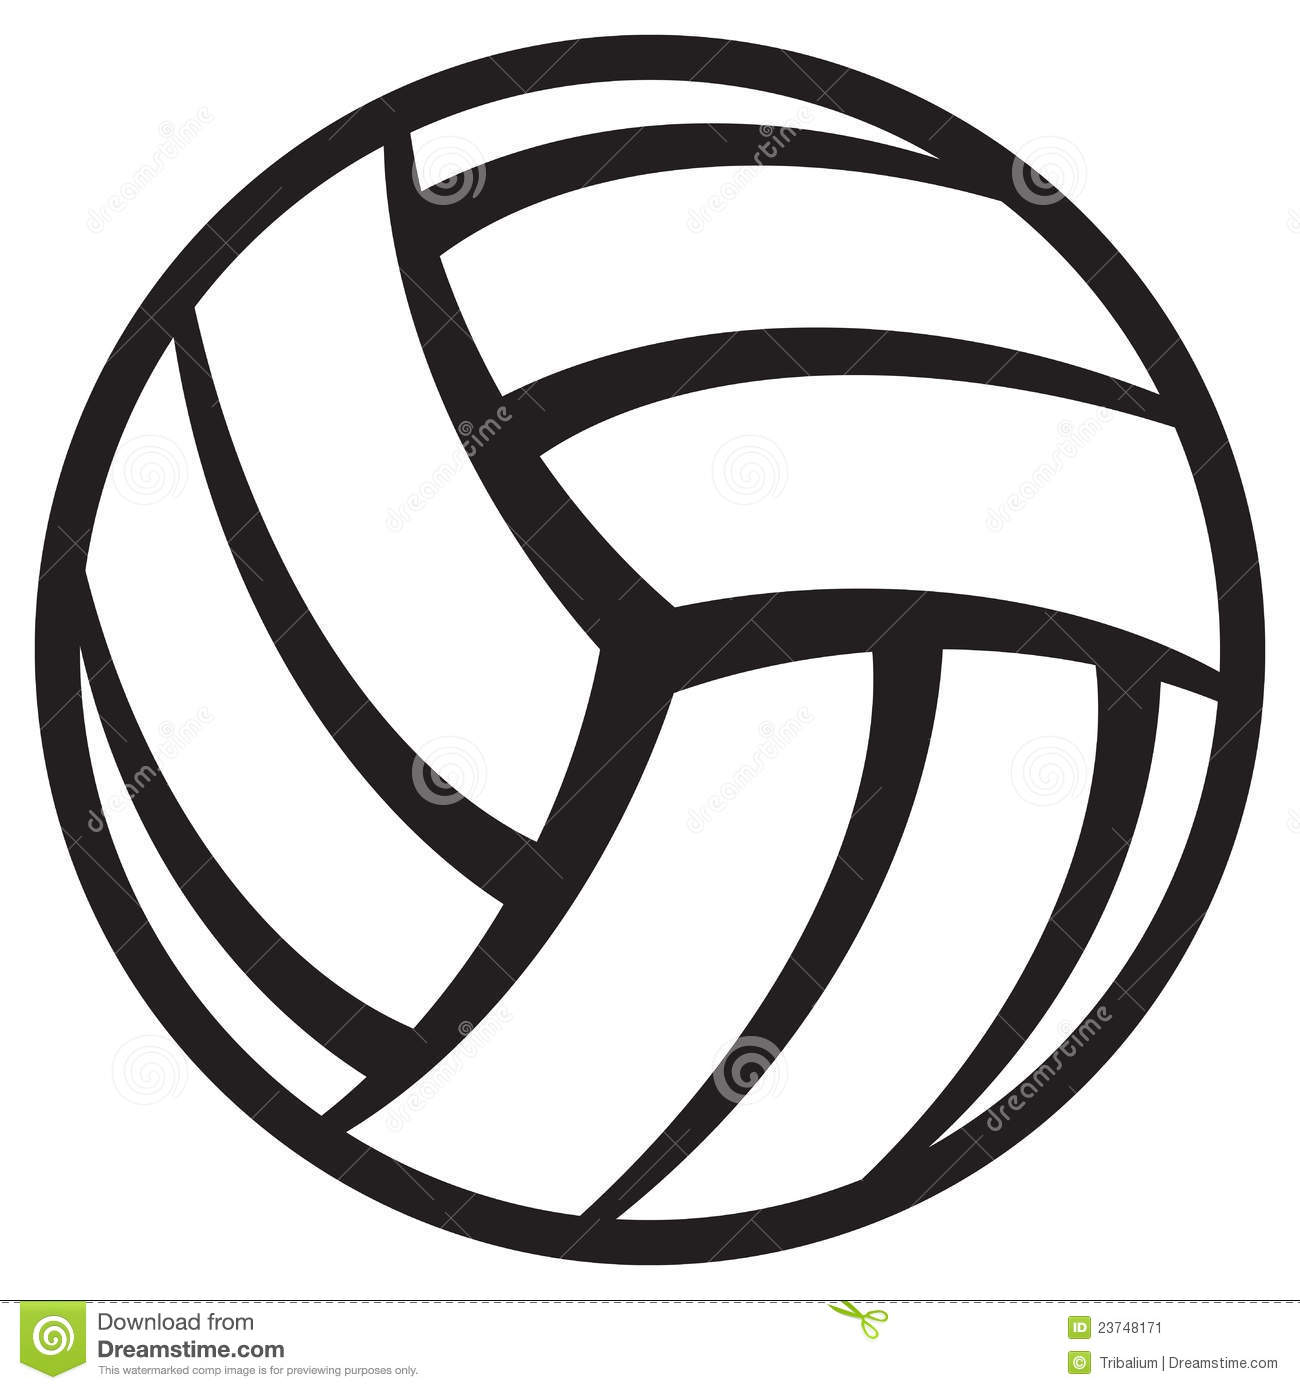 Volleyball clipart clipart cl - Clip Art Volleyball